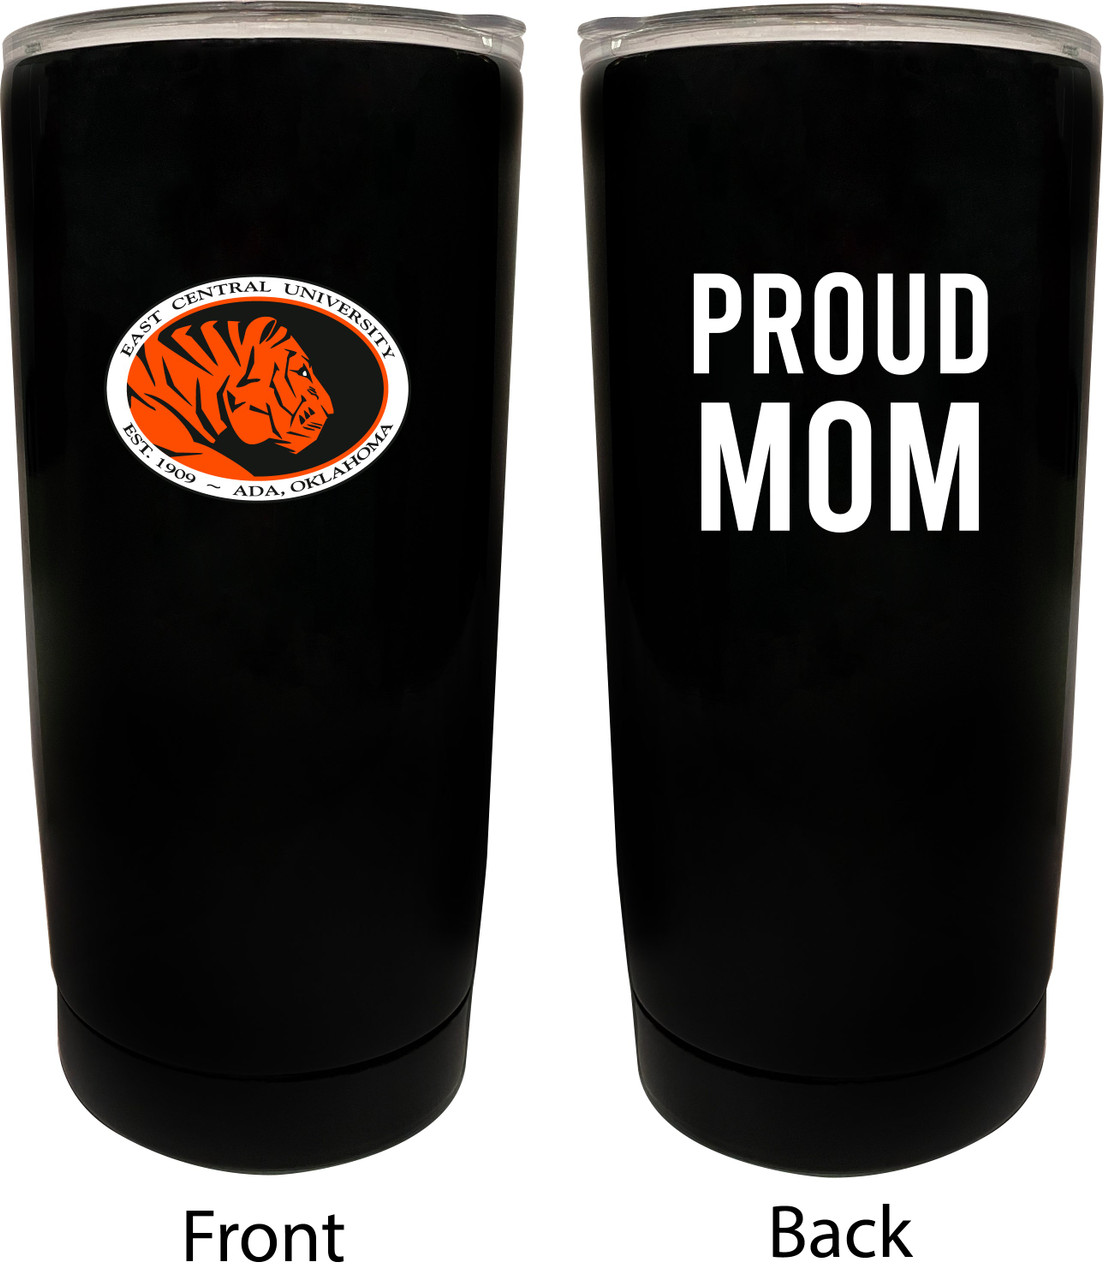 East Central University Proud MOM Insulated Tumblers